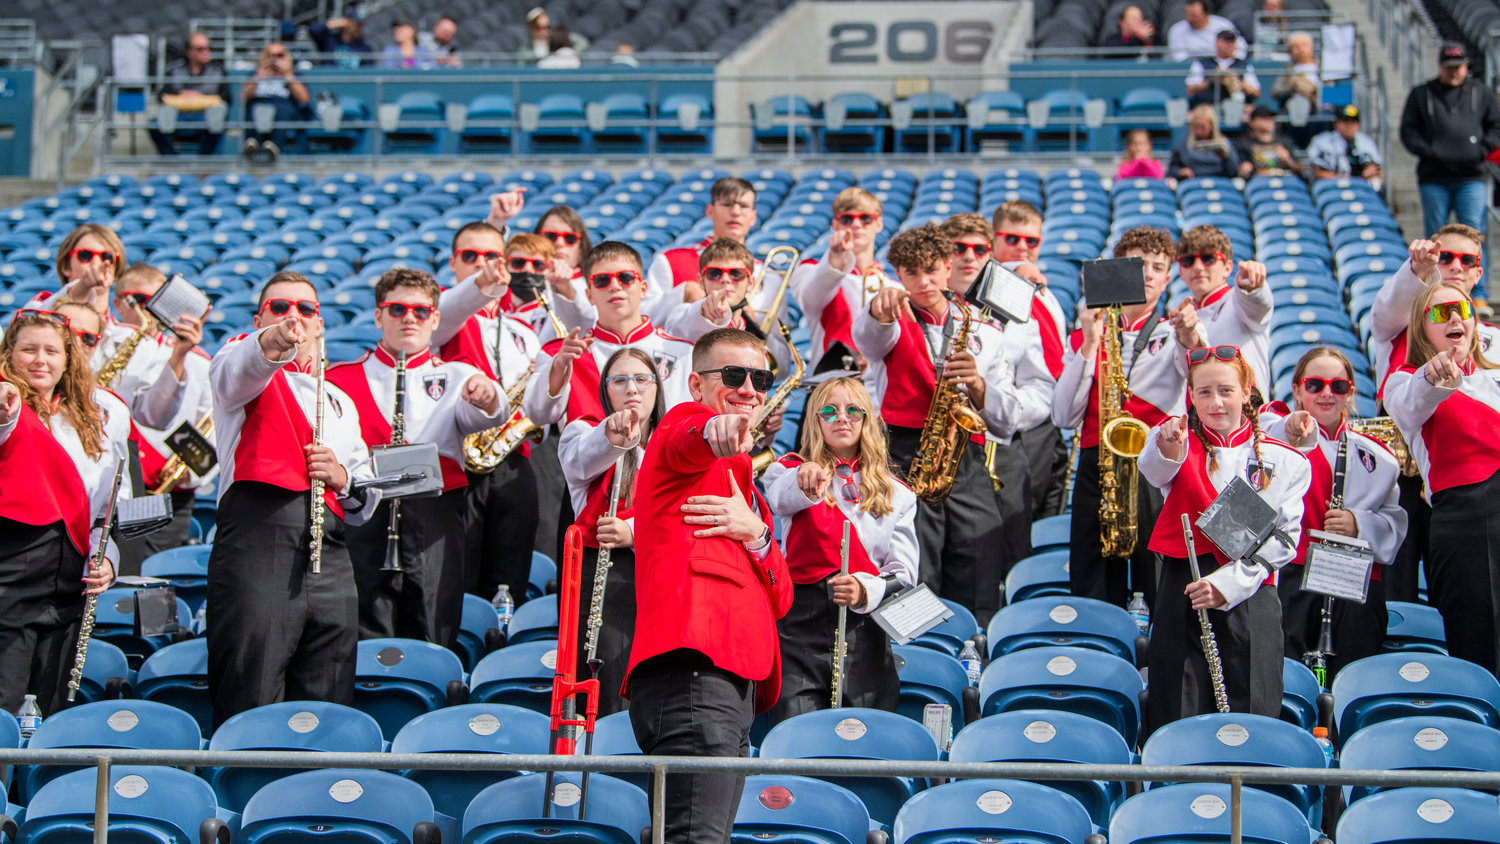 The Tenino High School Band poses and points while performing at Lumen Field in Seattle on Saturday.